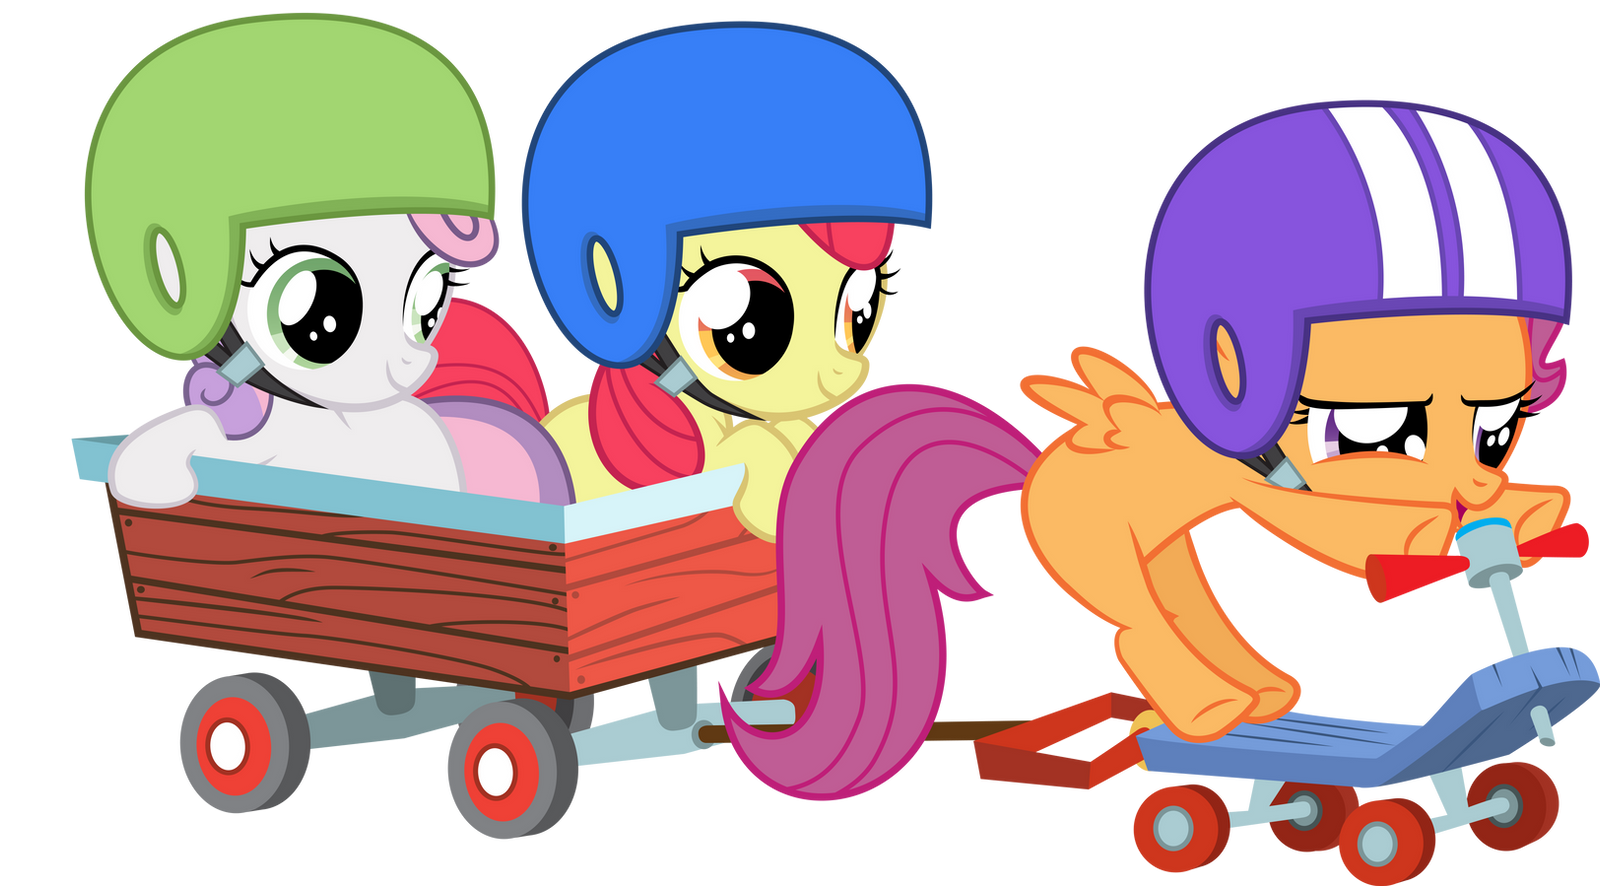 Cutie Mark Crusaders on a Mission